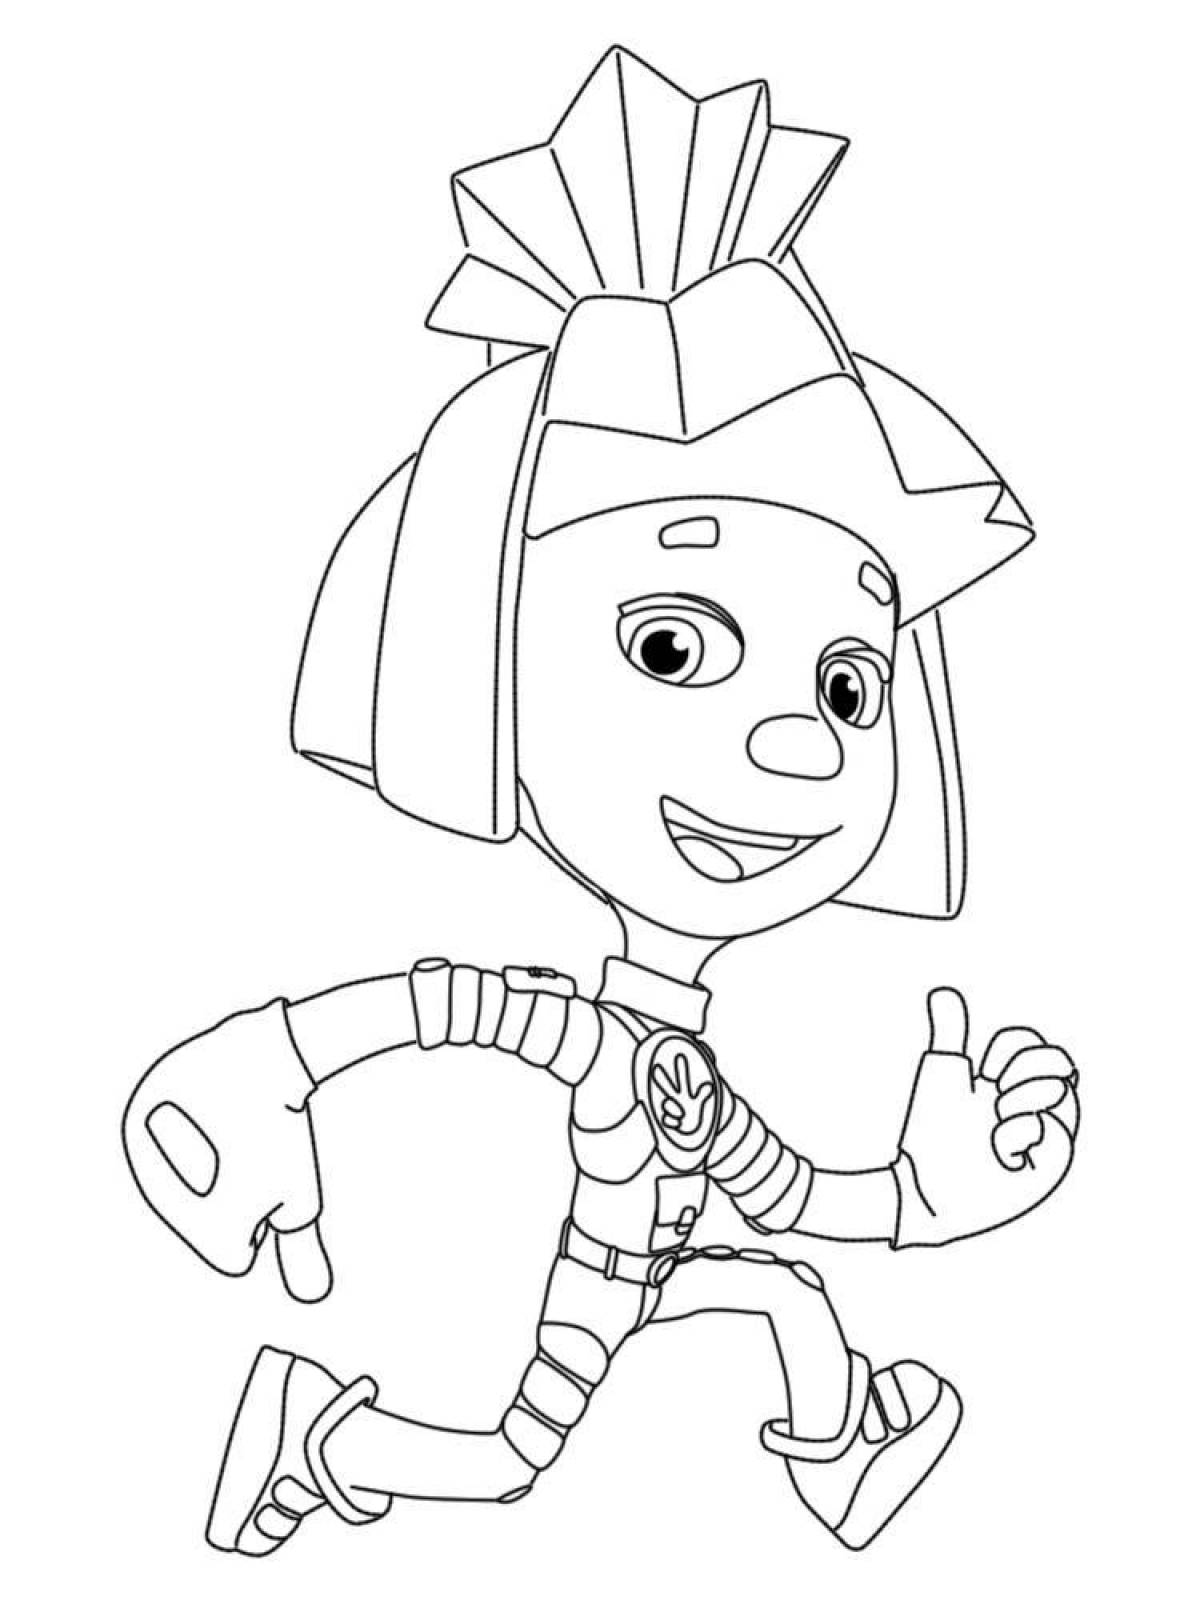 Playful zero and sim coloring page